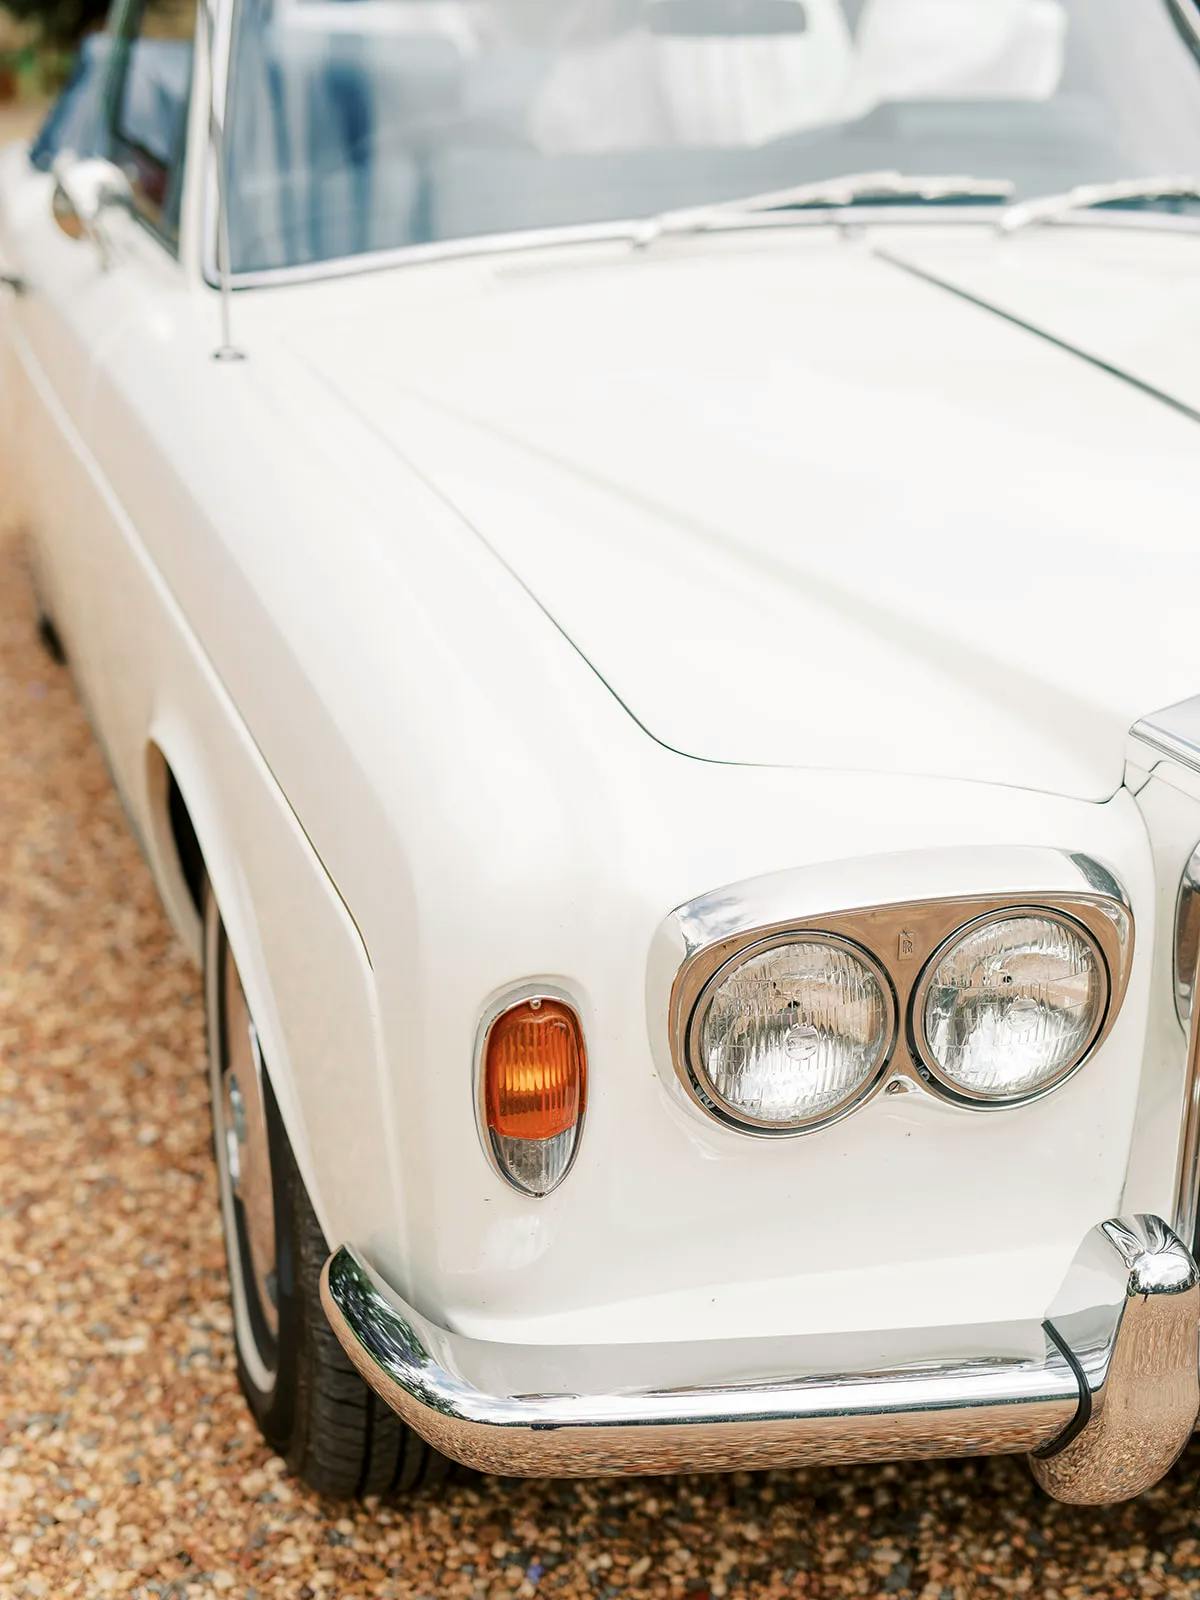 Close-up shot of the front left side of a vintage white car, showcasing the headlight, turn signal, and part of the chrome bumper. The car is parked on a gravel surface.